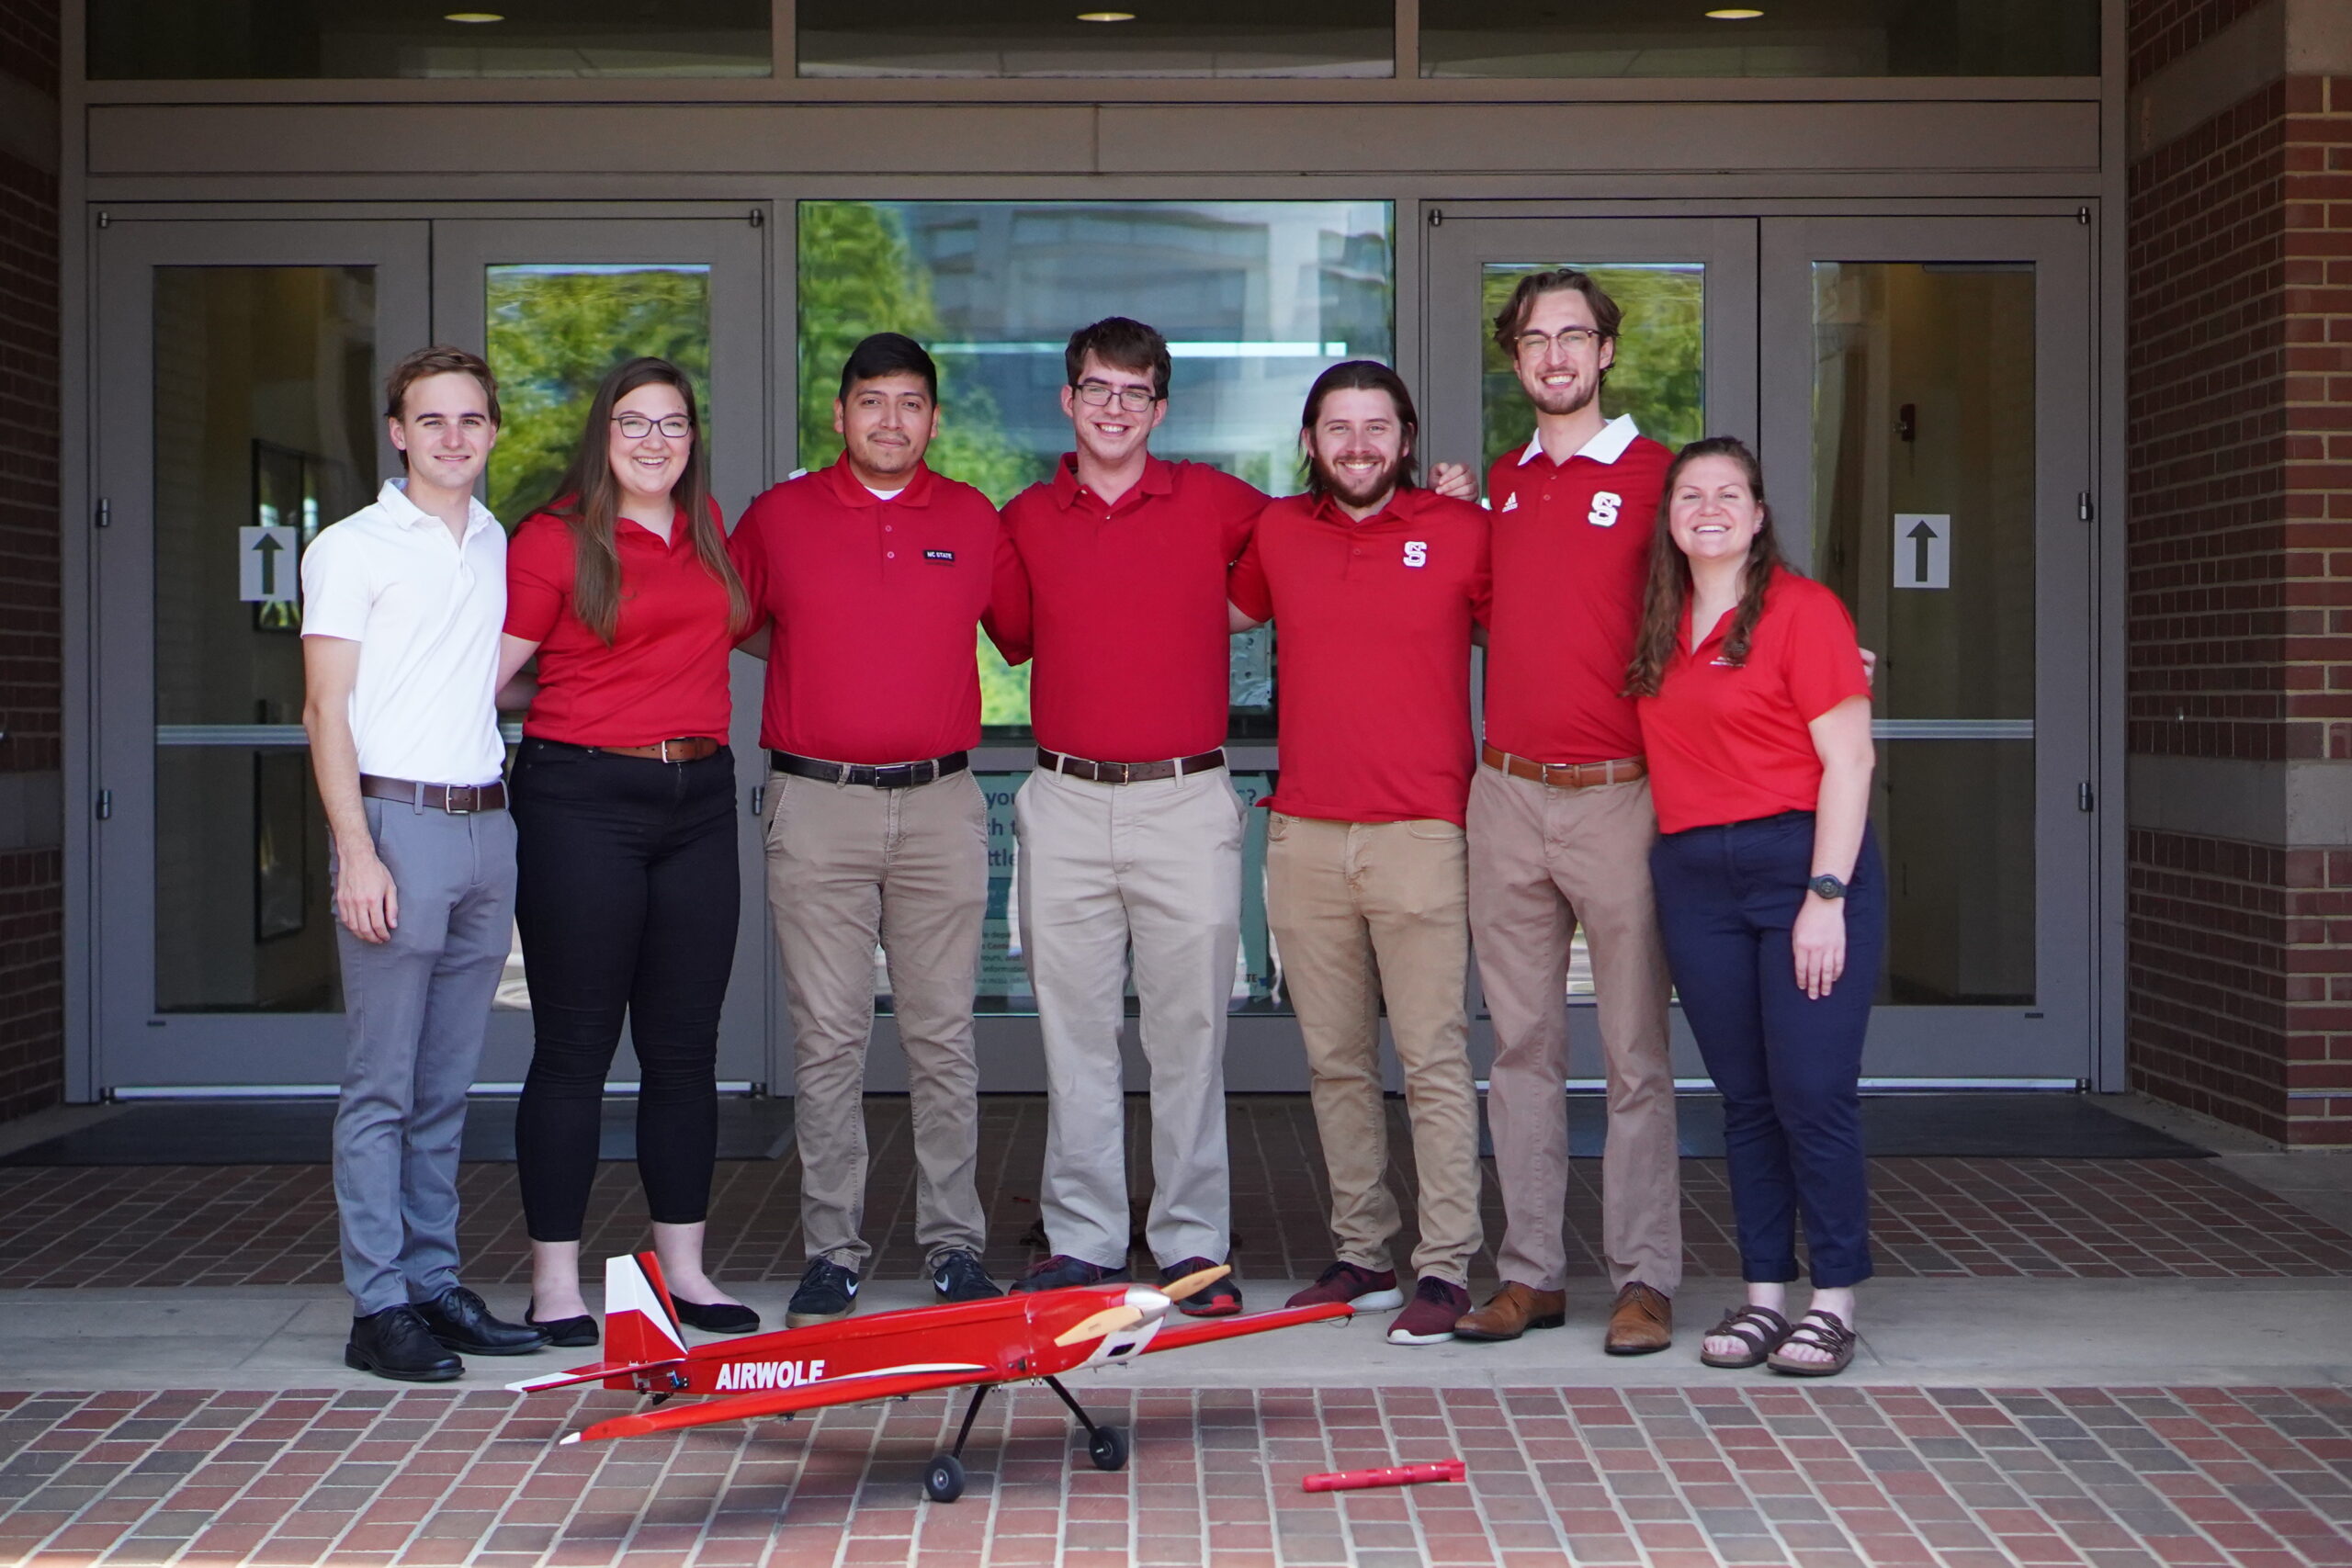 The NC State University American Institute of Aeronautics and Astronautics (AIAA) team showcases their remote-controlled flyer, Airwolf, built for the AIAA Design, Build, Fly competition.